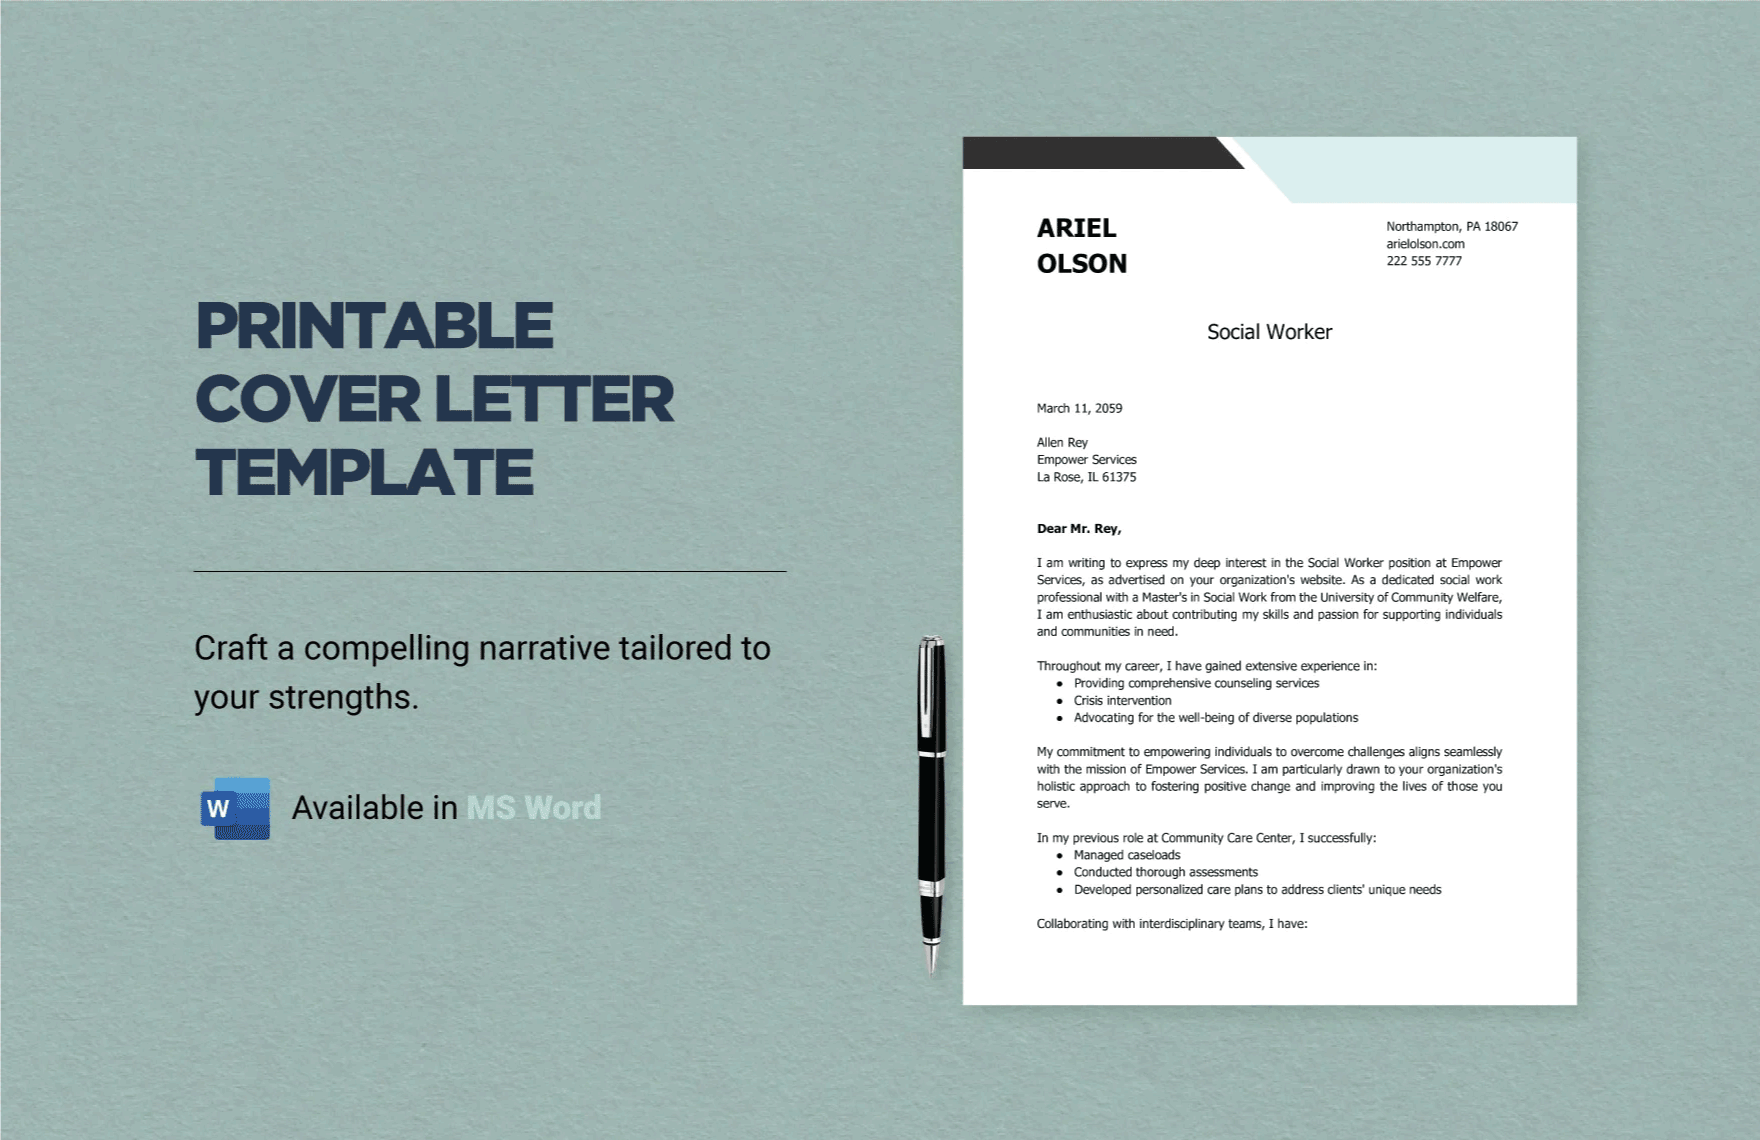 Free Printable Cover Letter Template in Word